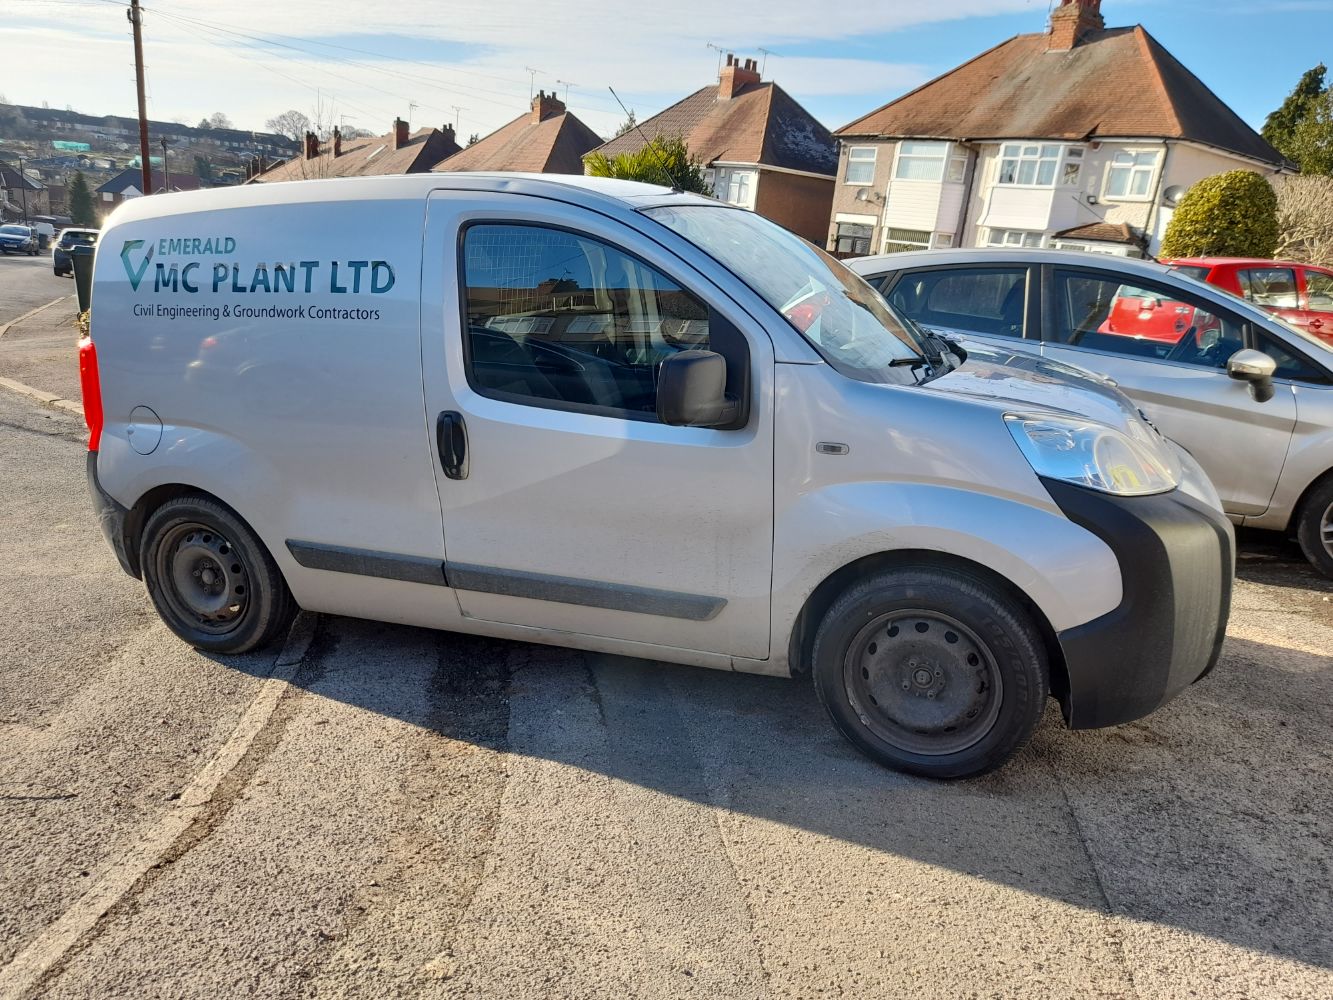 Peugeot Bipper 1.3 HDI 80 Professional Van (2016) (Relisted due to buyer defaulting)